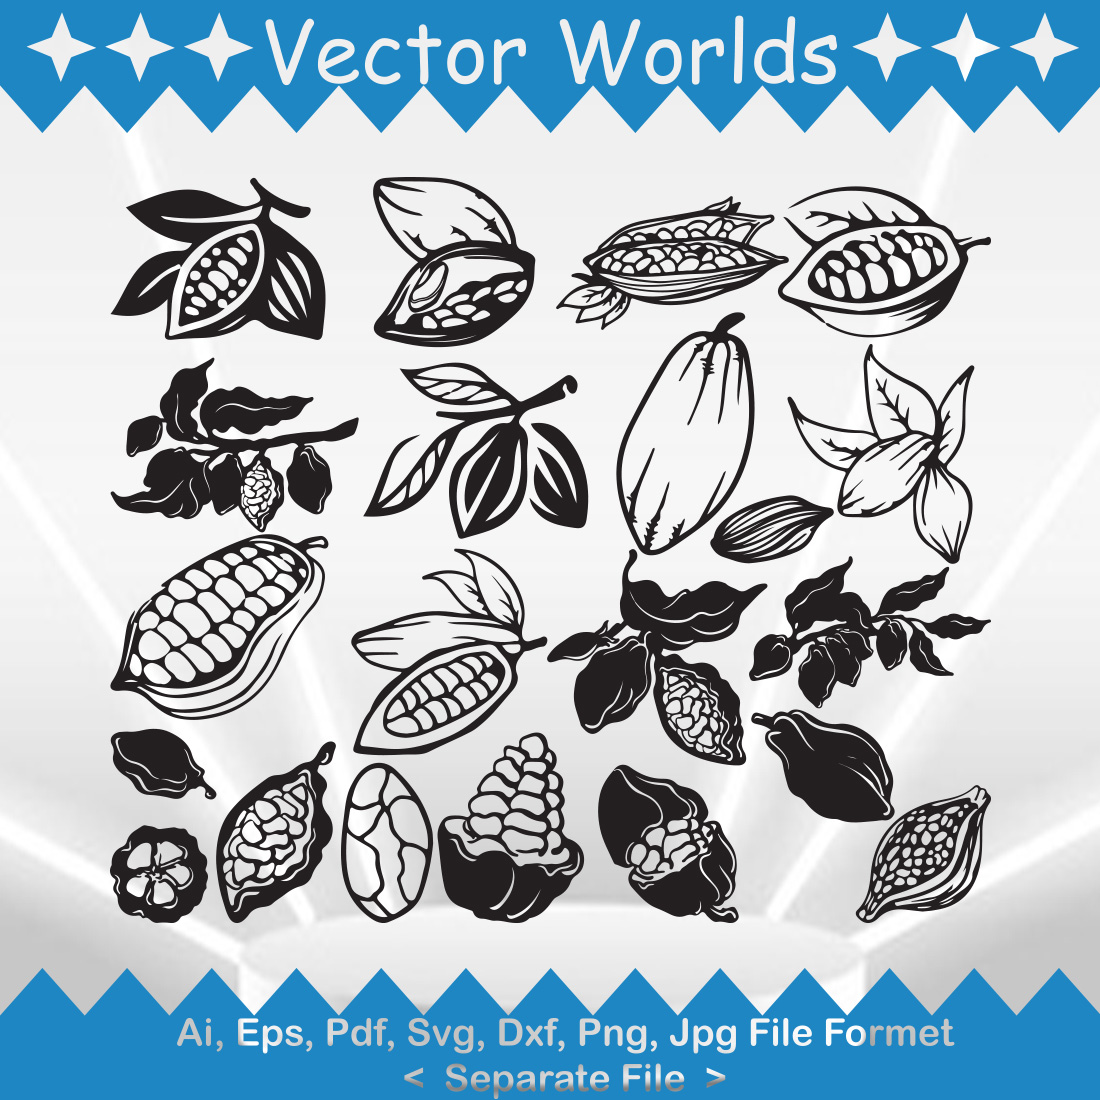 Cacao SVG Vector Design cover image.